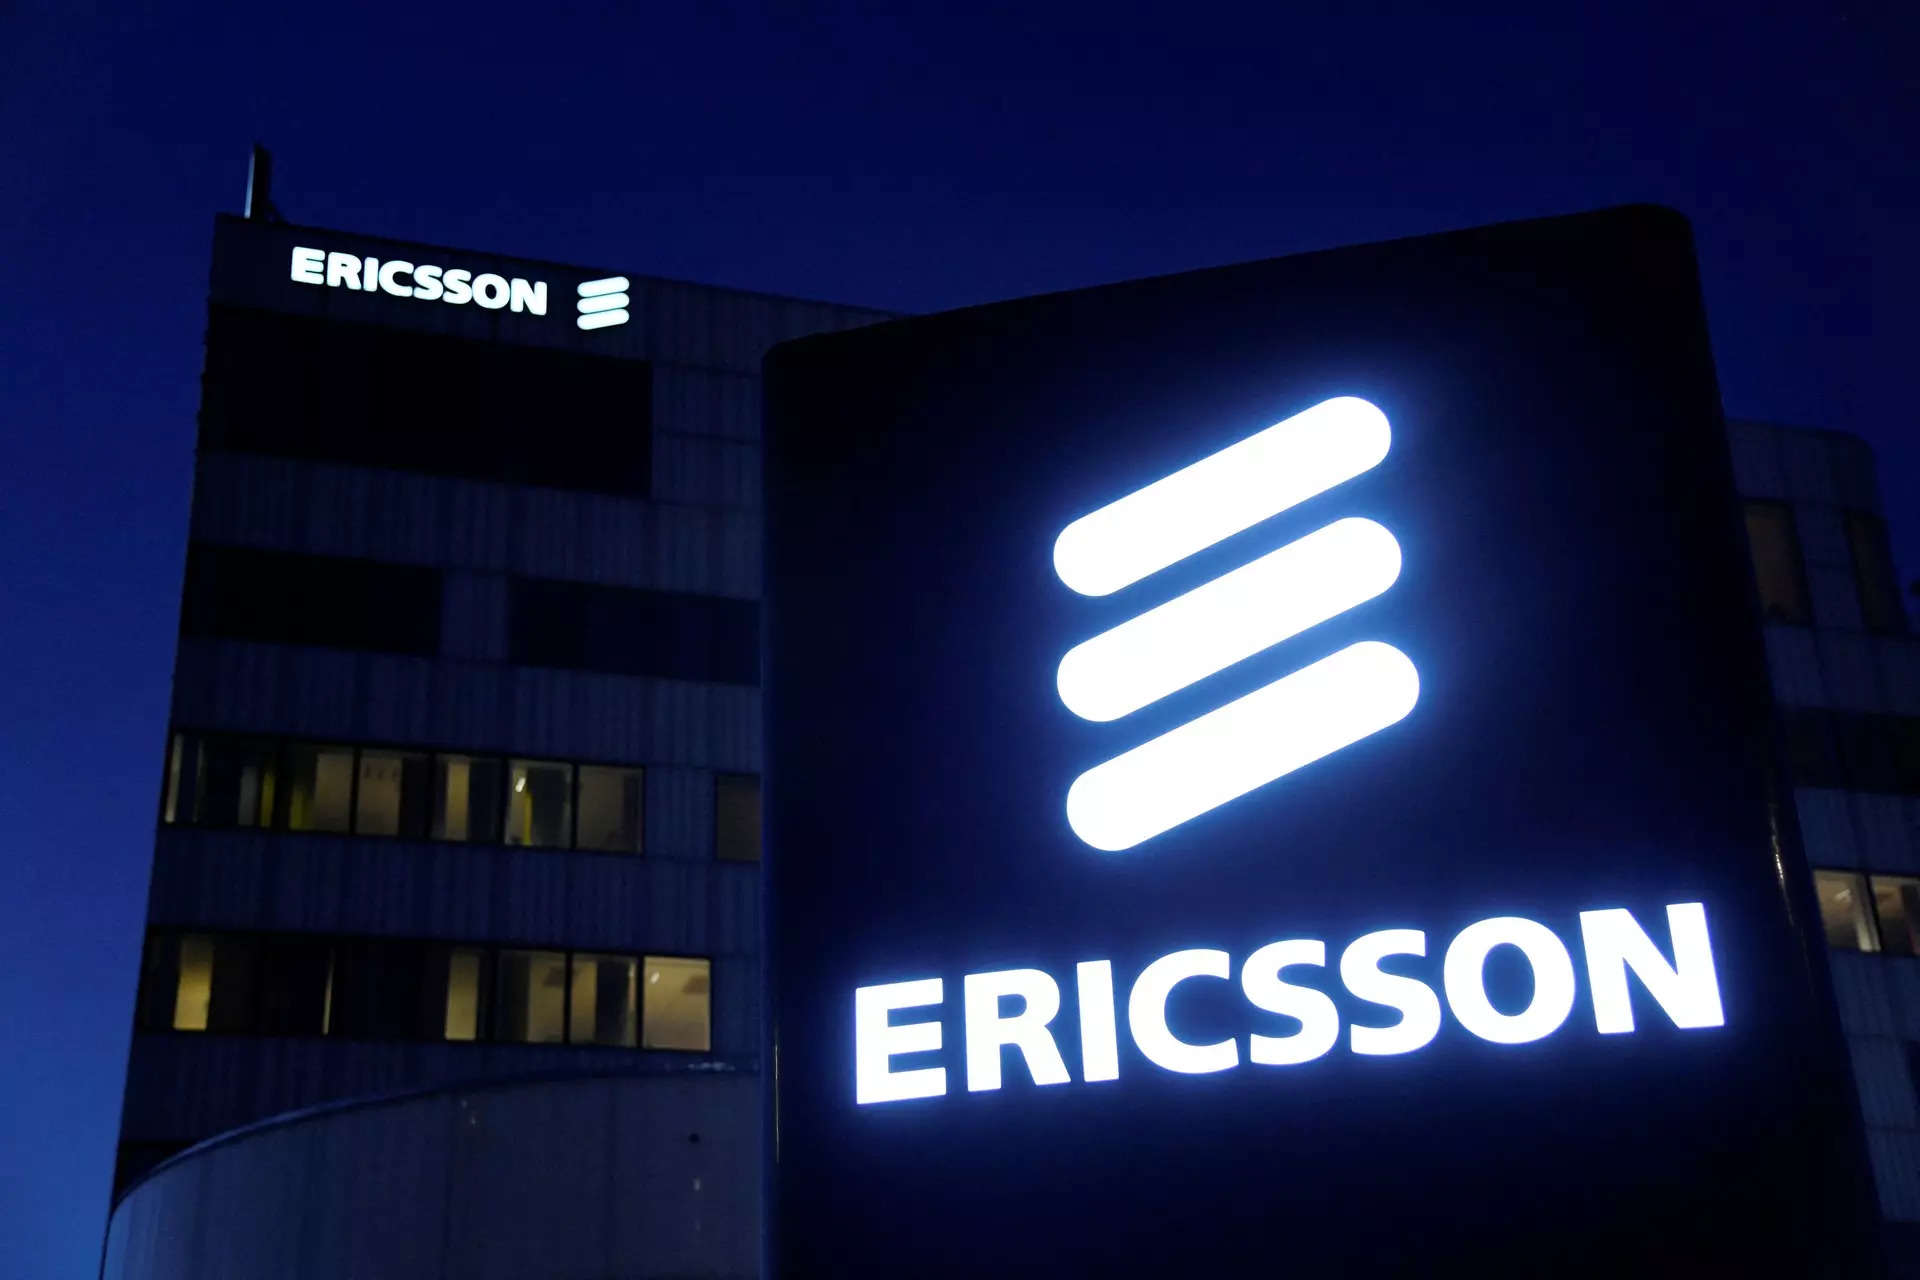 <p>(FILES) A photo taken on October 20, 2022 shows the Ericsson headquarters with the company's logo in Stockholm, Sweden. (Photo by Lars SCHRODER / TT NEWS AGENCY / AFP) / SWEDEN OUT</p>